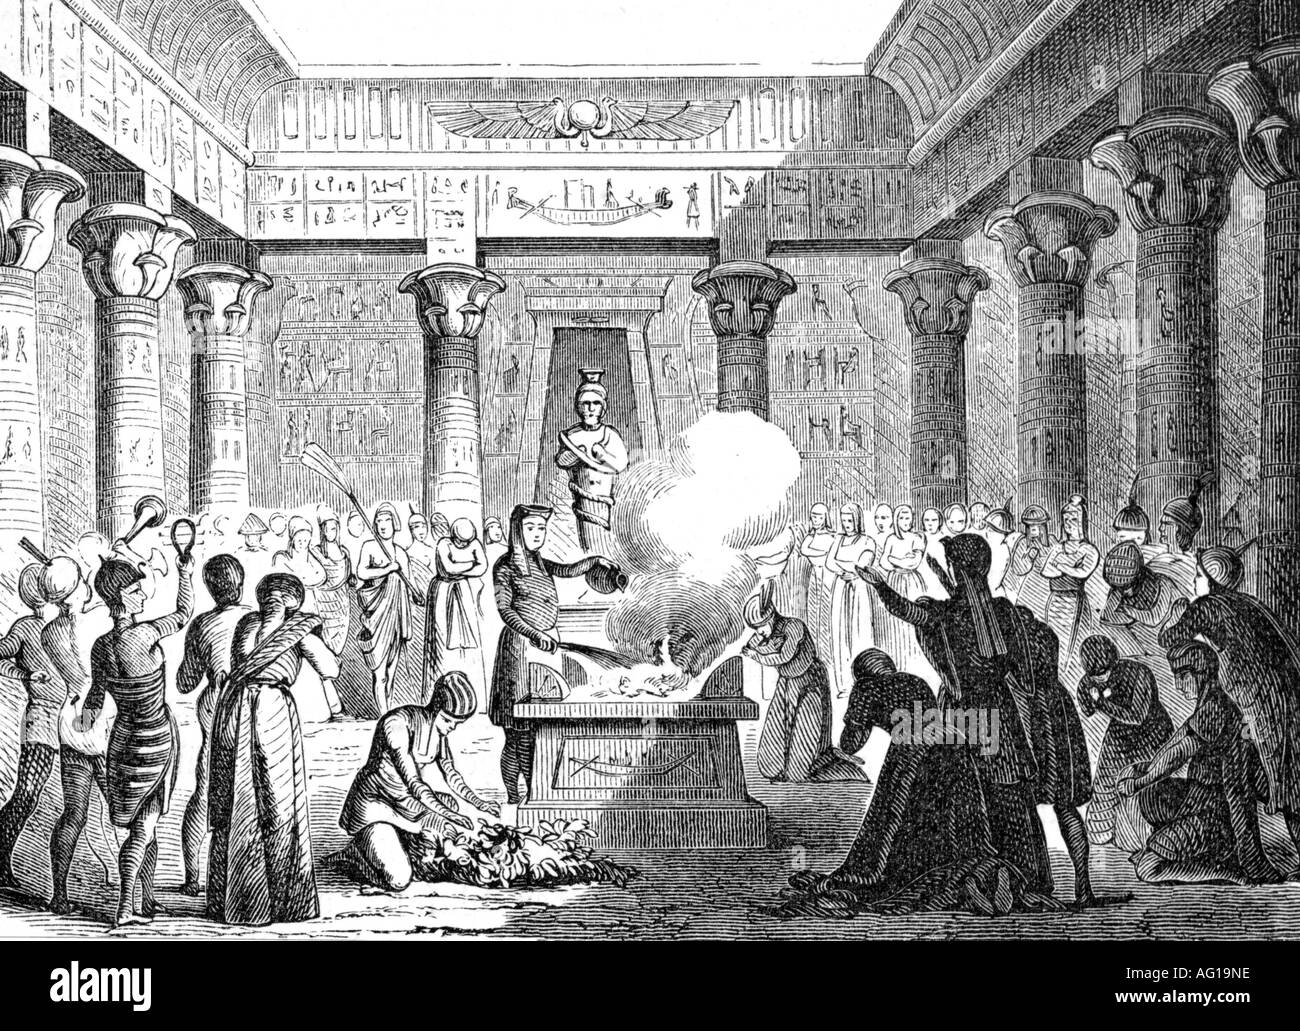 Egypt, religion, service, temple of Serapis, engraving, 19th century, antiquity, ancient world, historic, historical, ancient world, people, Stock Photo